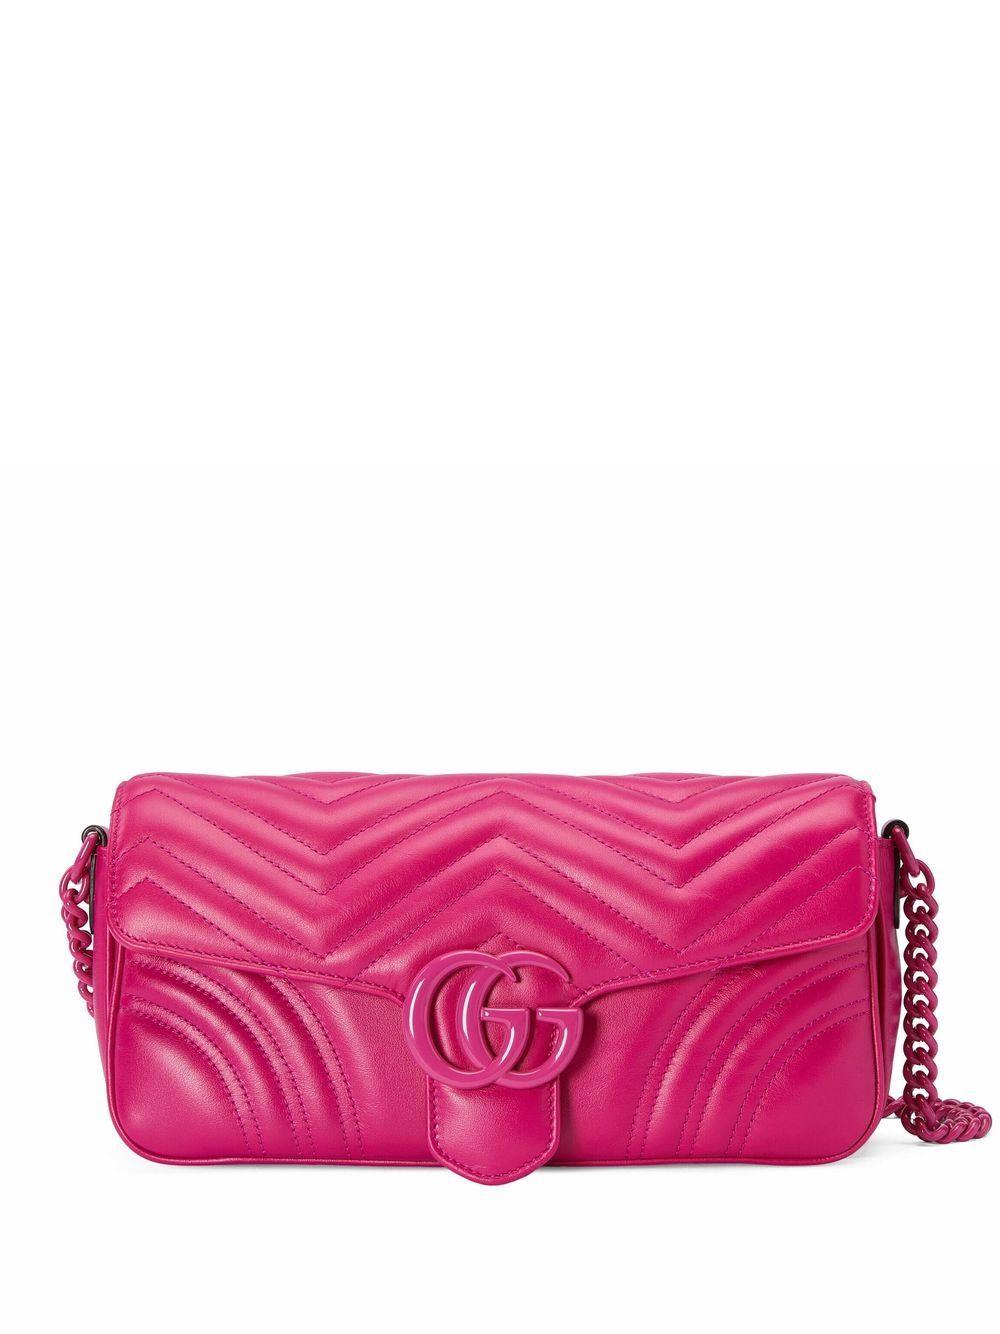 Gucci GG Marmont Shoulder Bag in Pink | Lyst